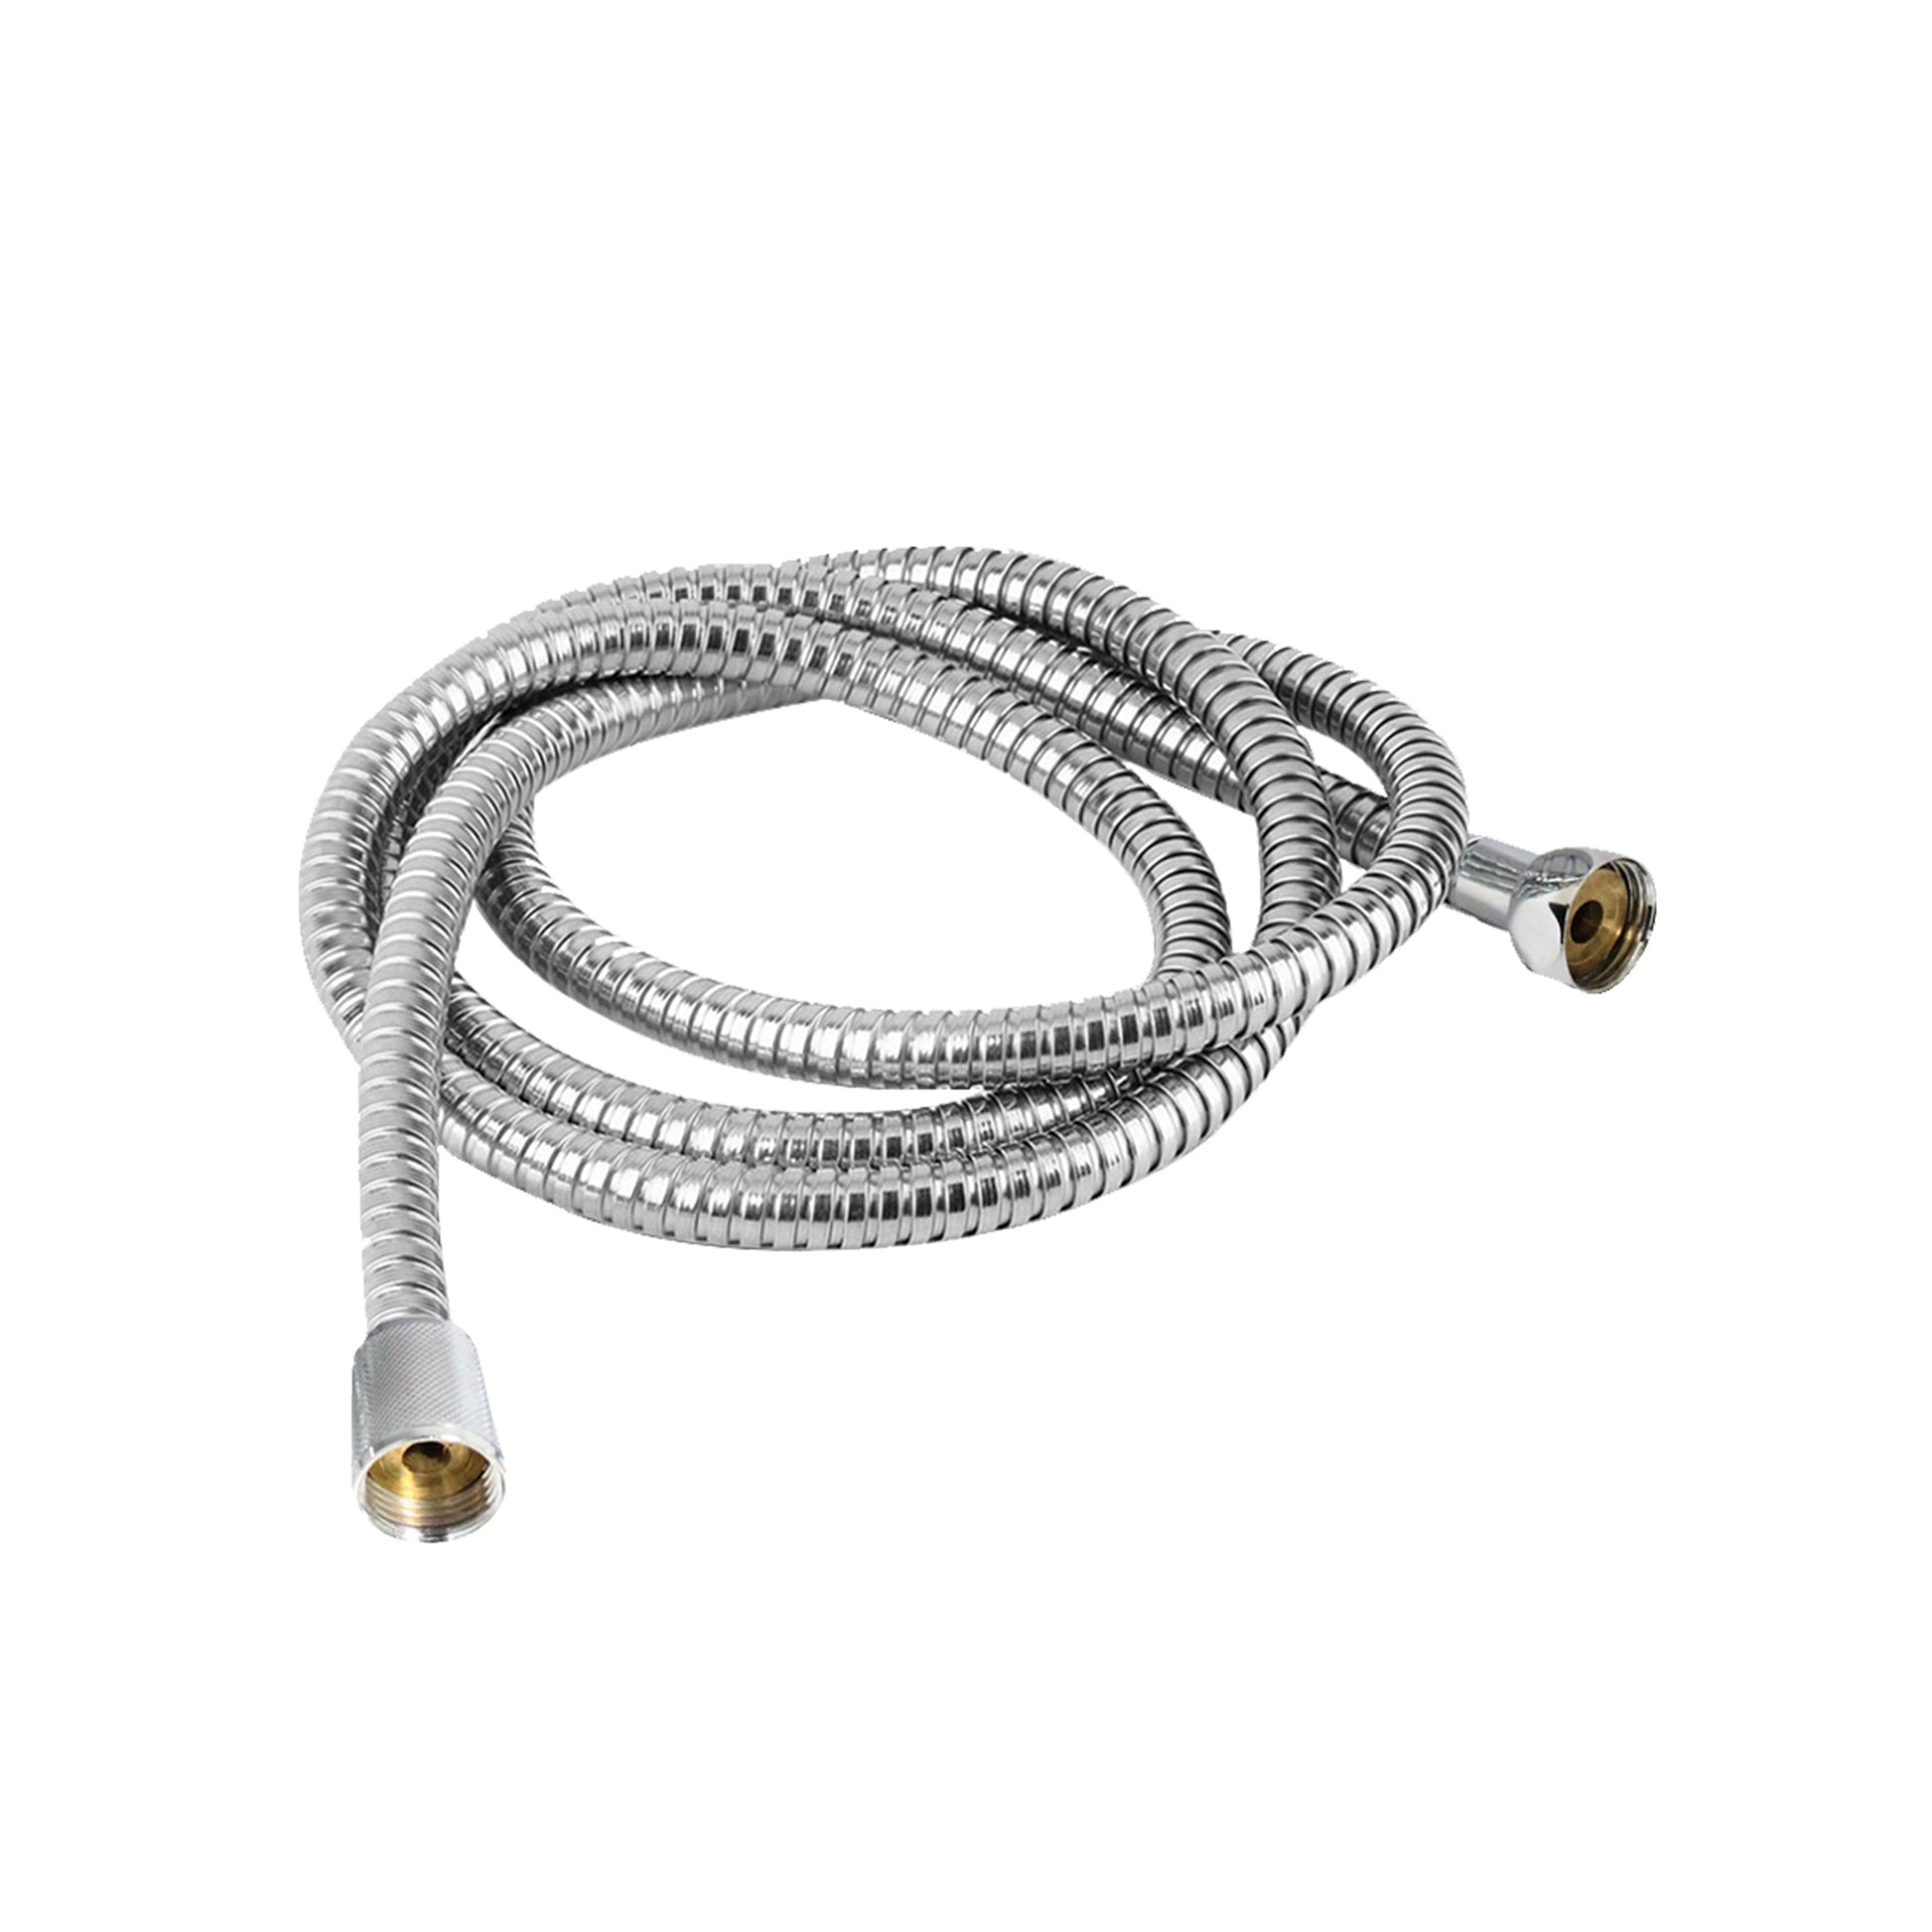 1.5m-Stainless-Steel-Non-Kink-Shower-Hose-twisting